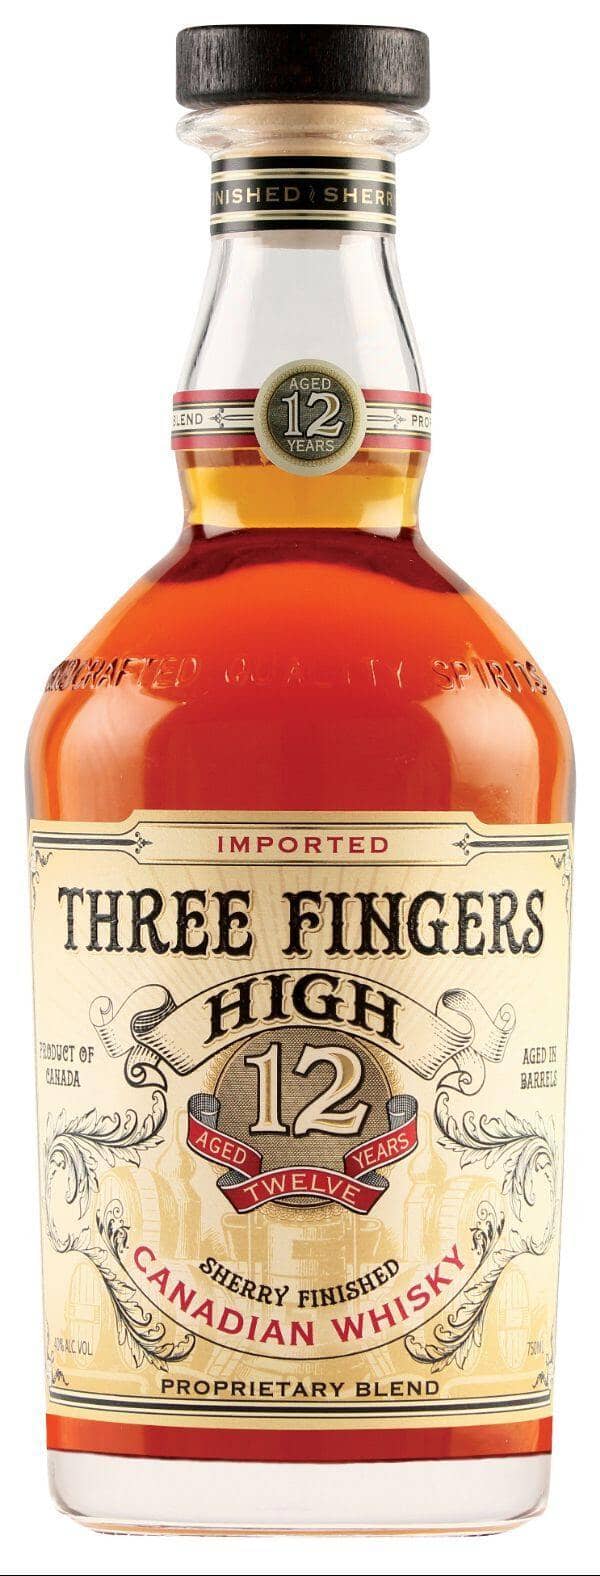 Buy Three Fingers High 12 Yr Canadian Whiskey 750mL Online - The Barrel Tap Online Liquor Delivered